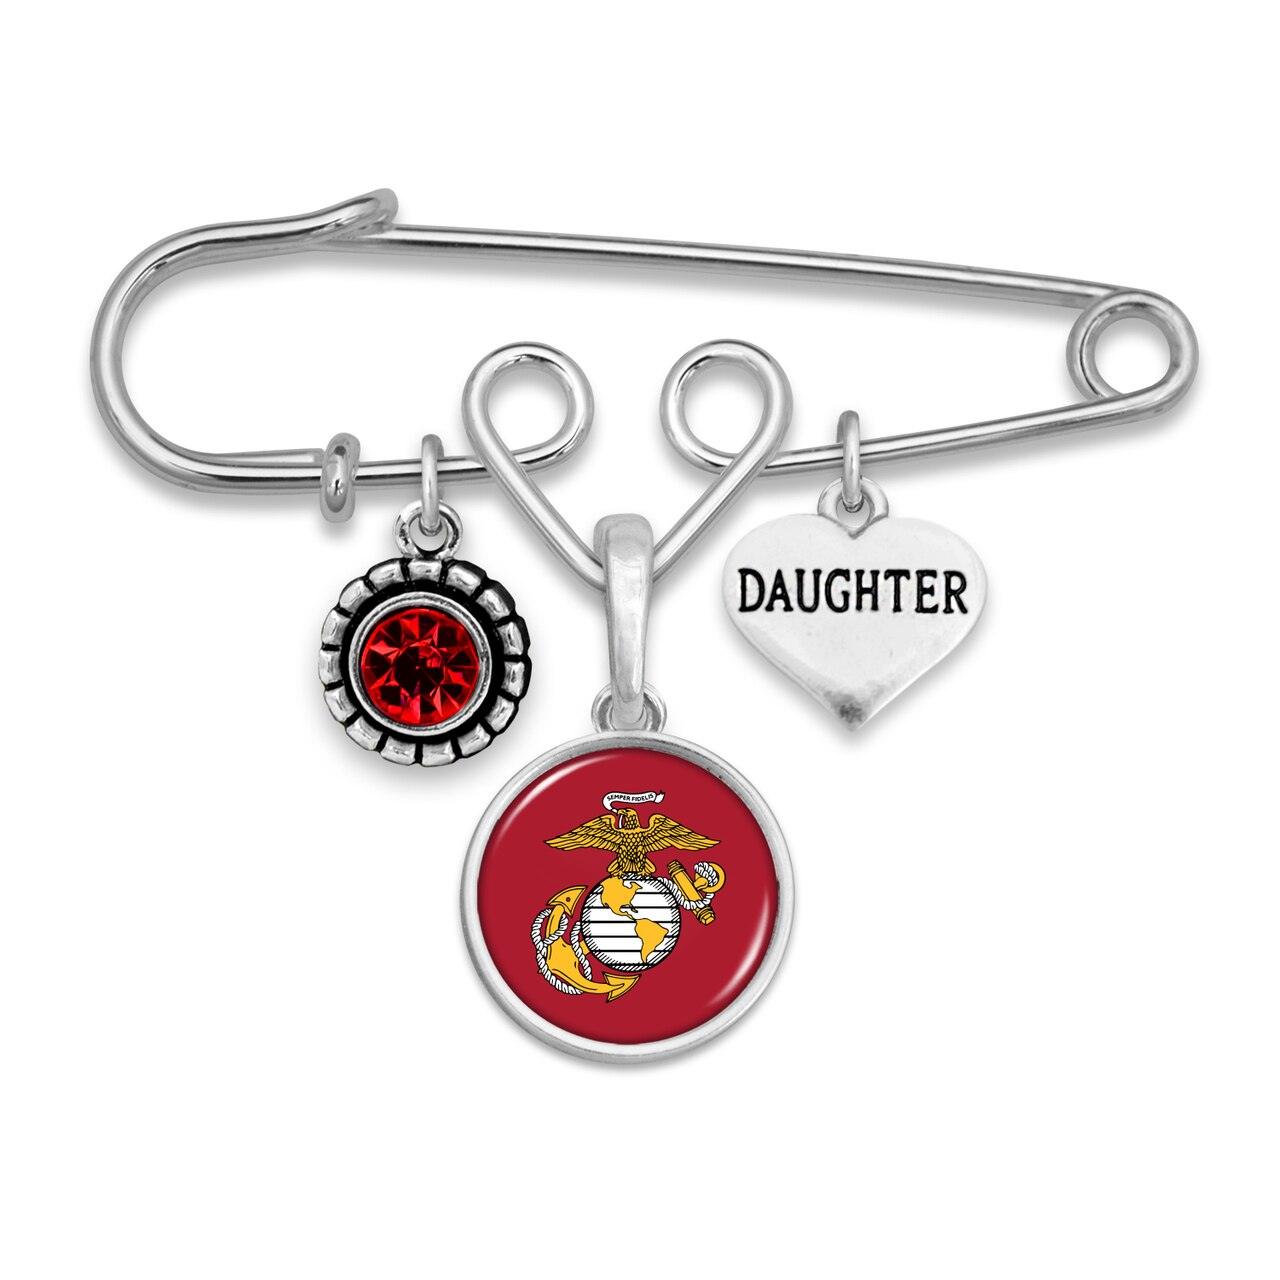 U.S. Marines Triple Charm Brooch with Daughter Accent Charm - Military Republic